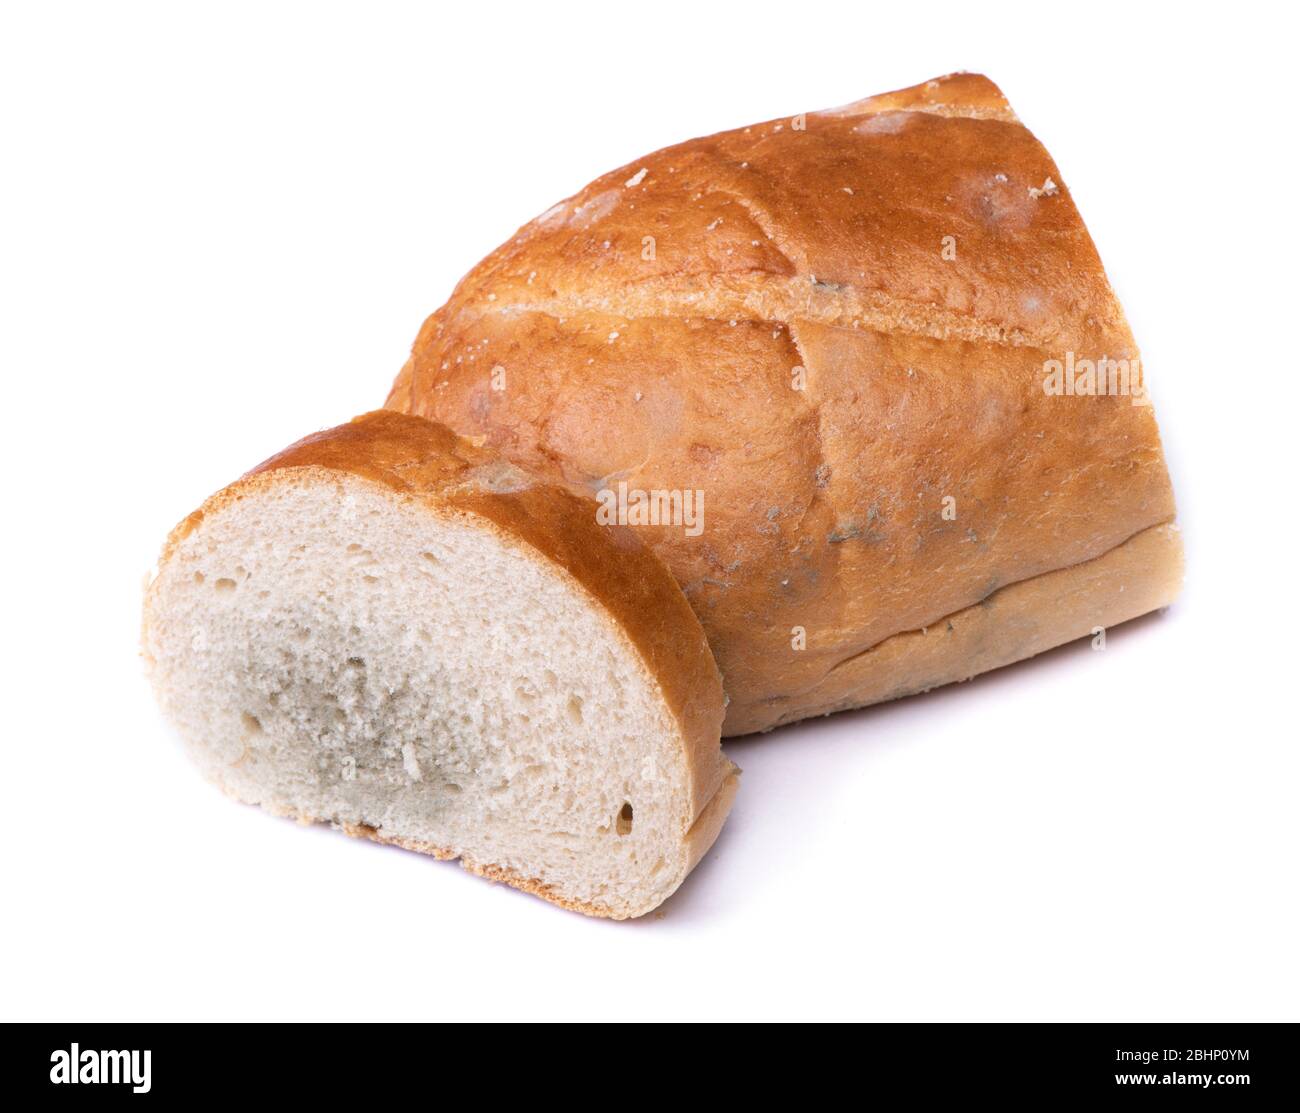 Piece of moldy bread isolated on white background Stock Photo